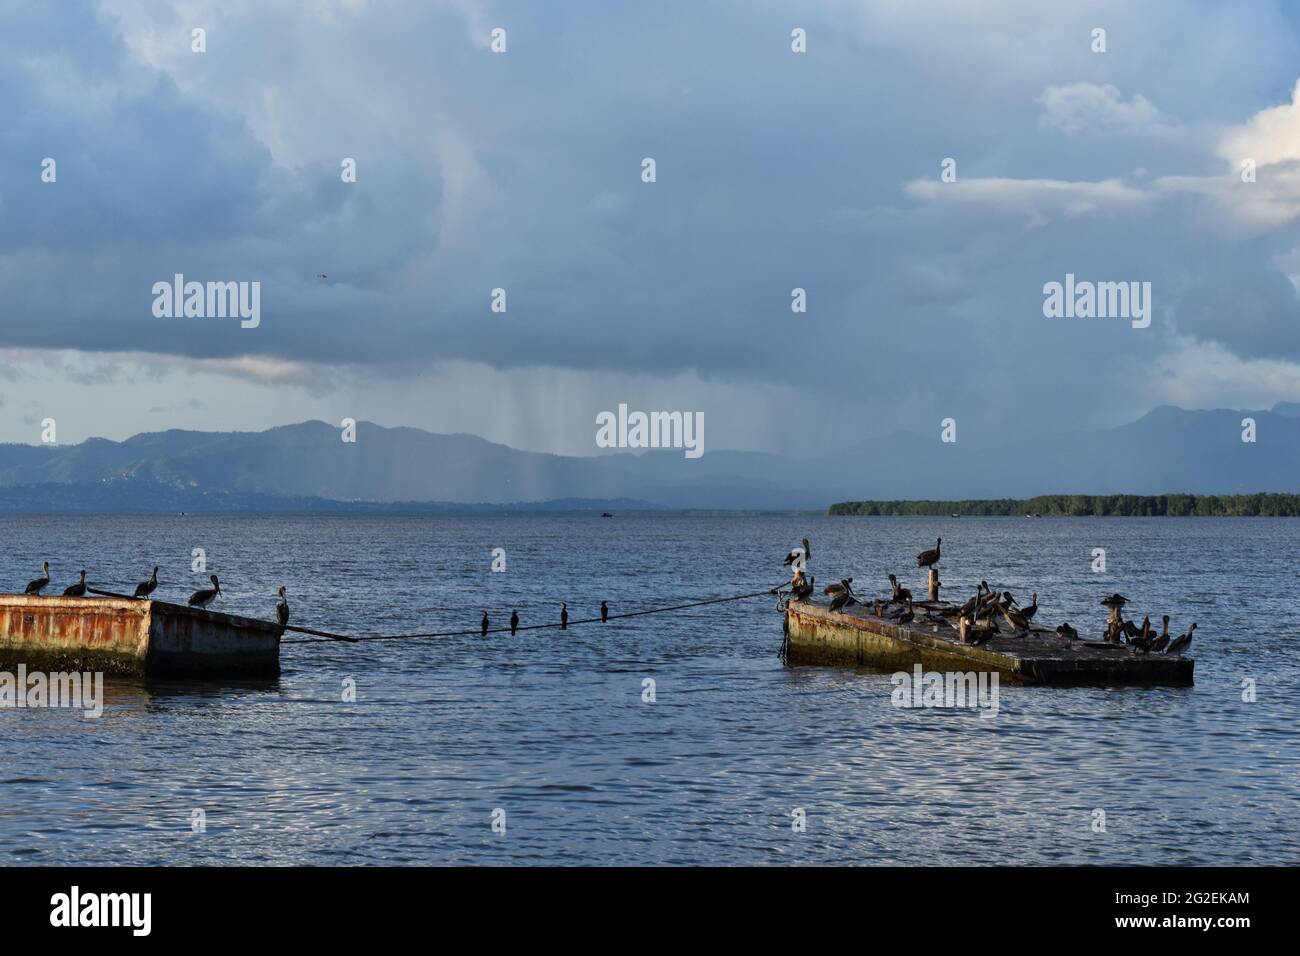 Pelicans stand on abandoned boats in the Gulf of Paria in Trinidad. Stock Photo